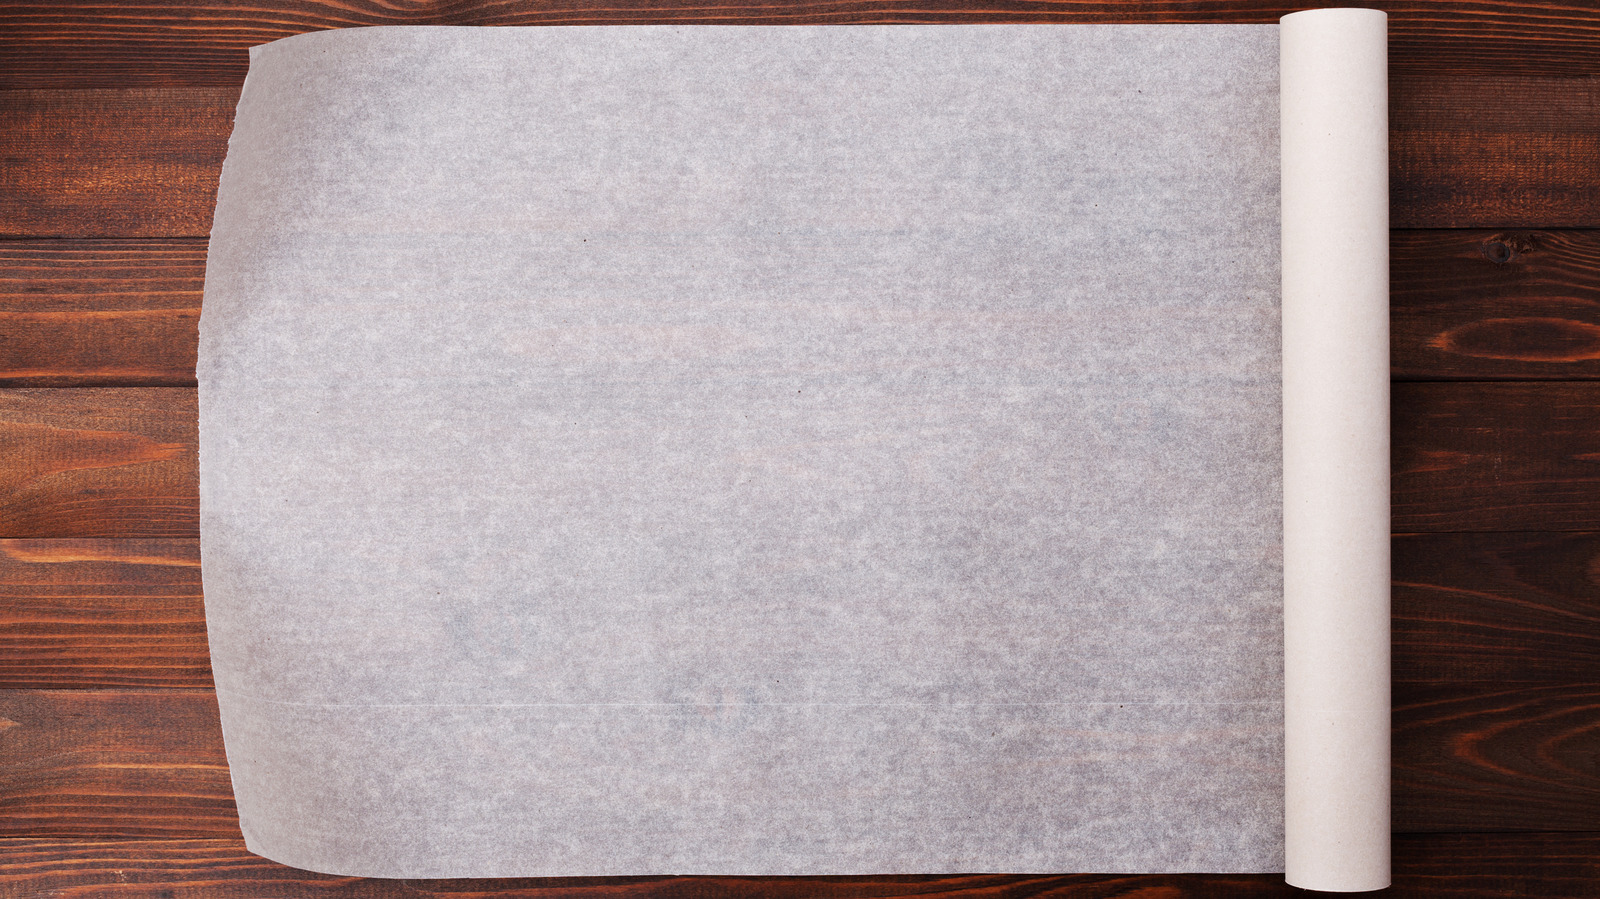 Waxed Paper vs. Parchment Paper—What You Need to Know